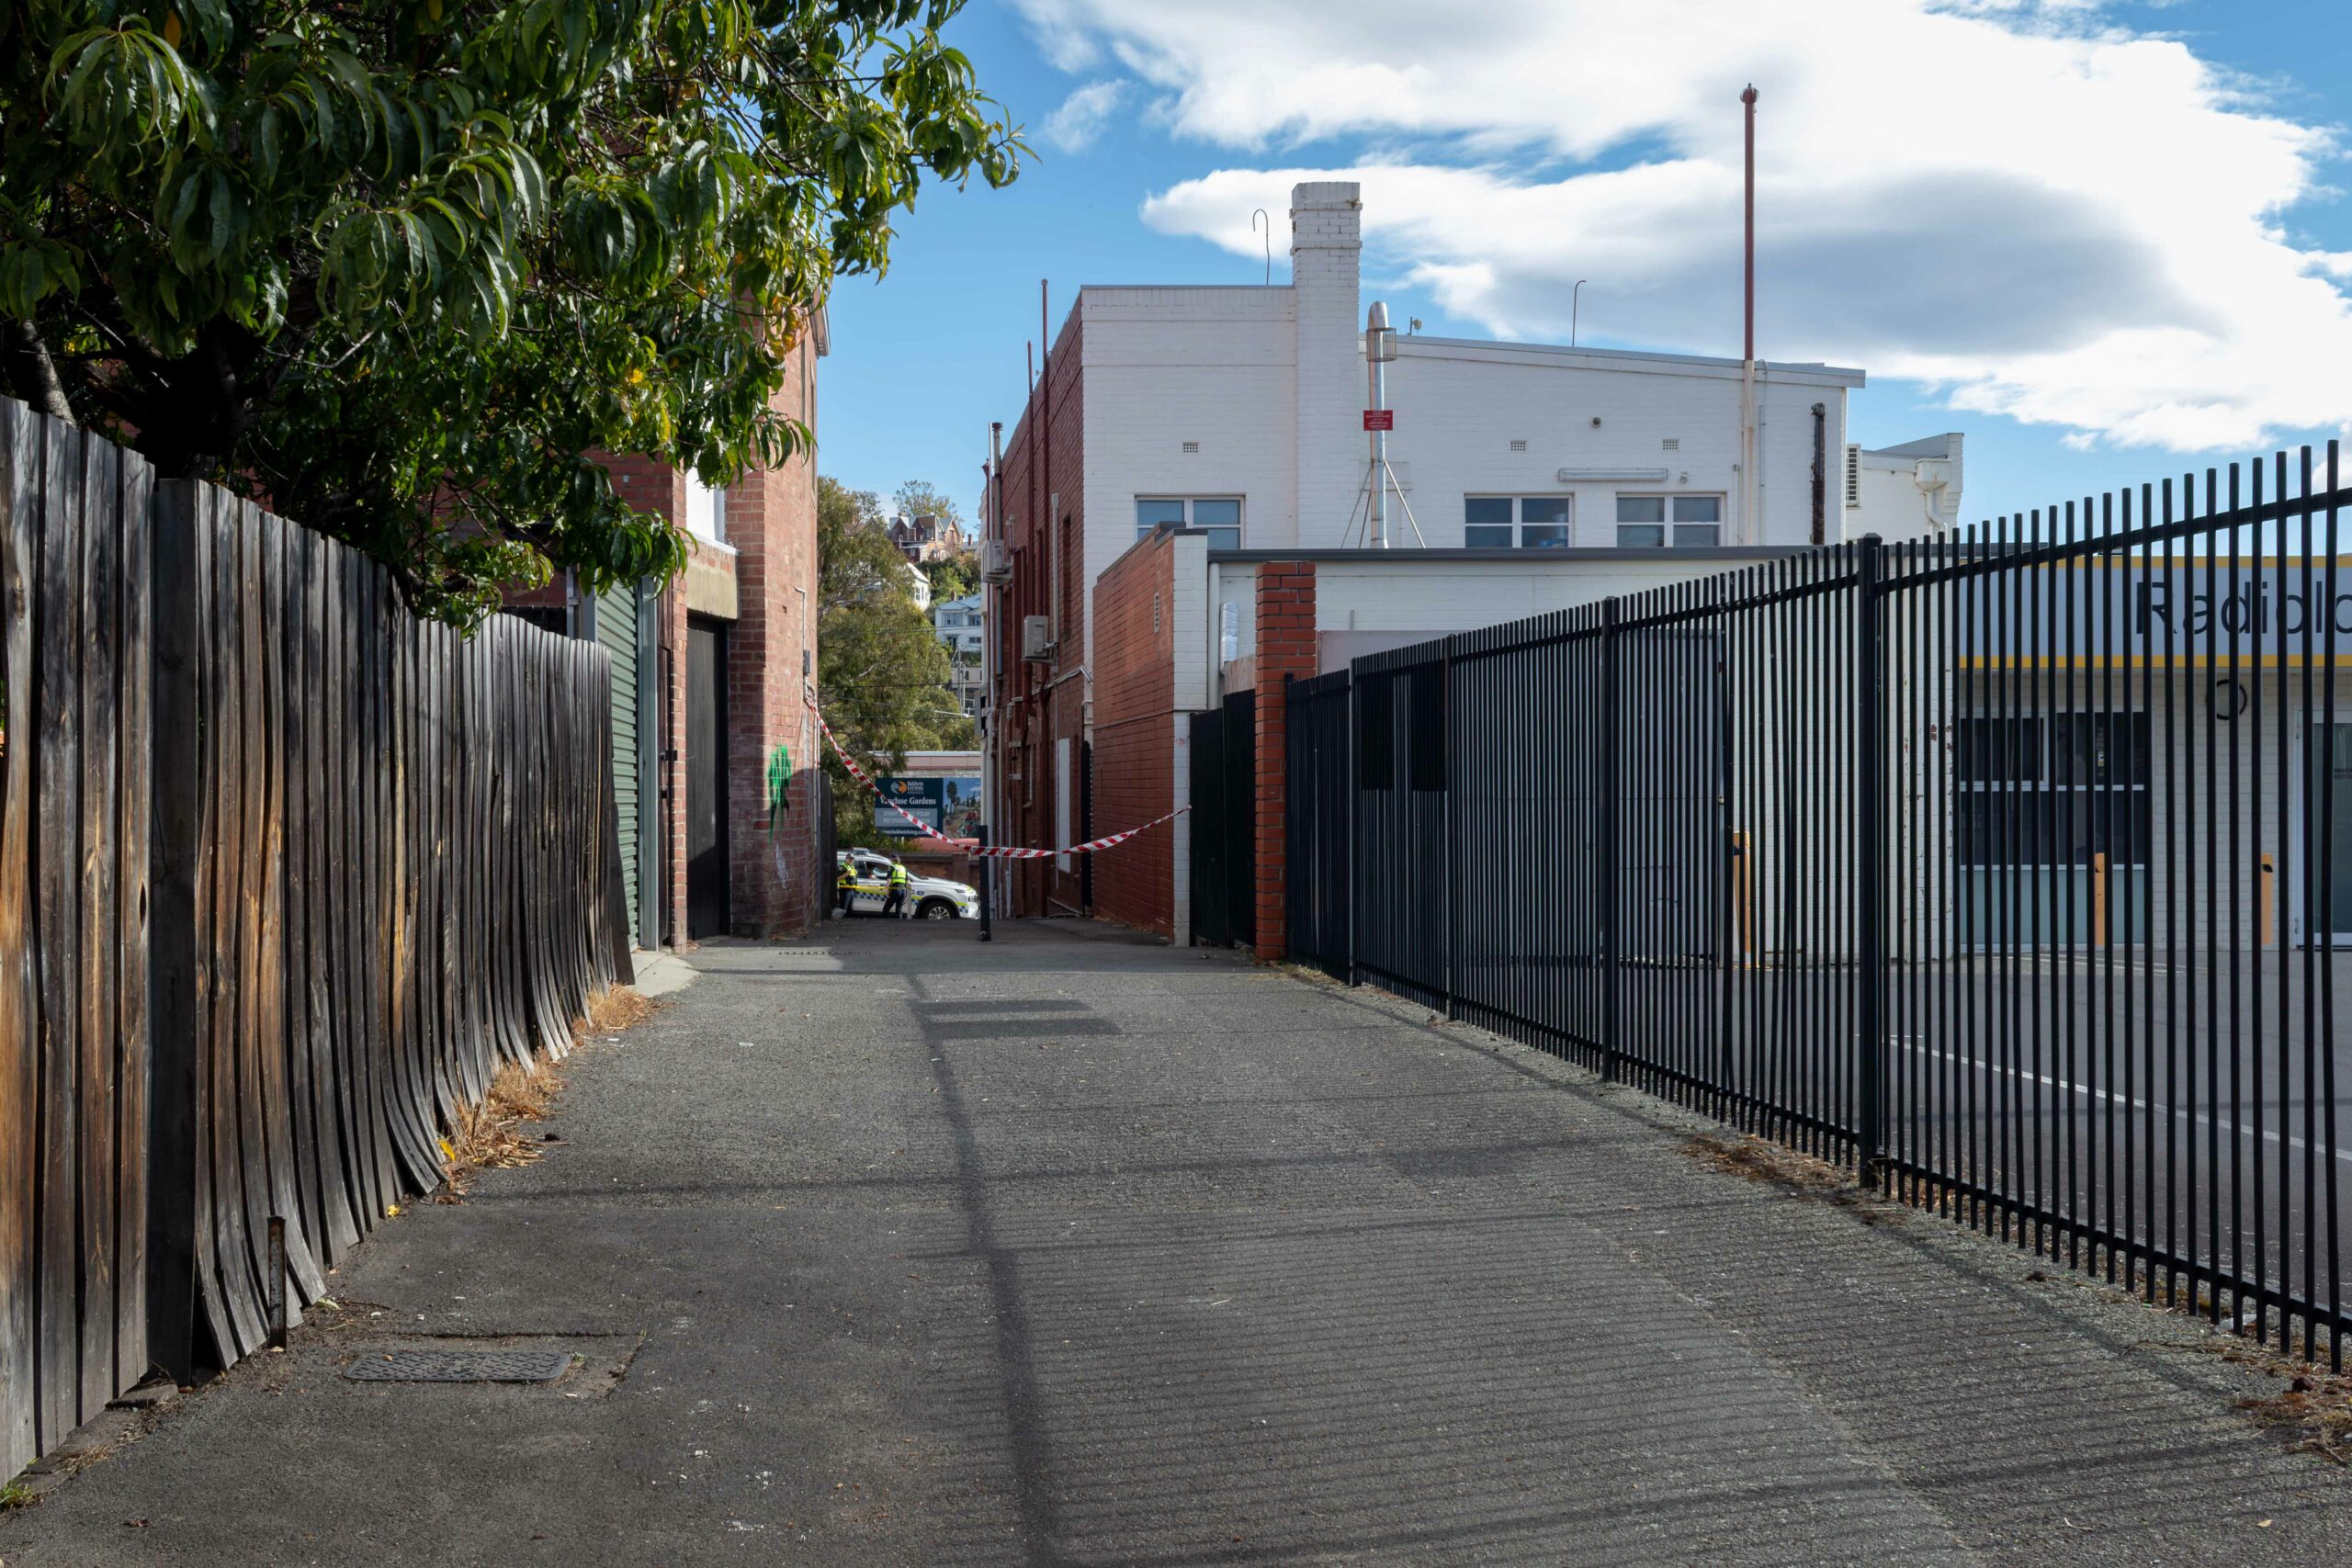 A fenced laneway with a large white bulding ot the righ tof the photo. The lane is taped off and a police car can be seen on the road at the end of the lane